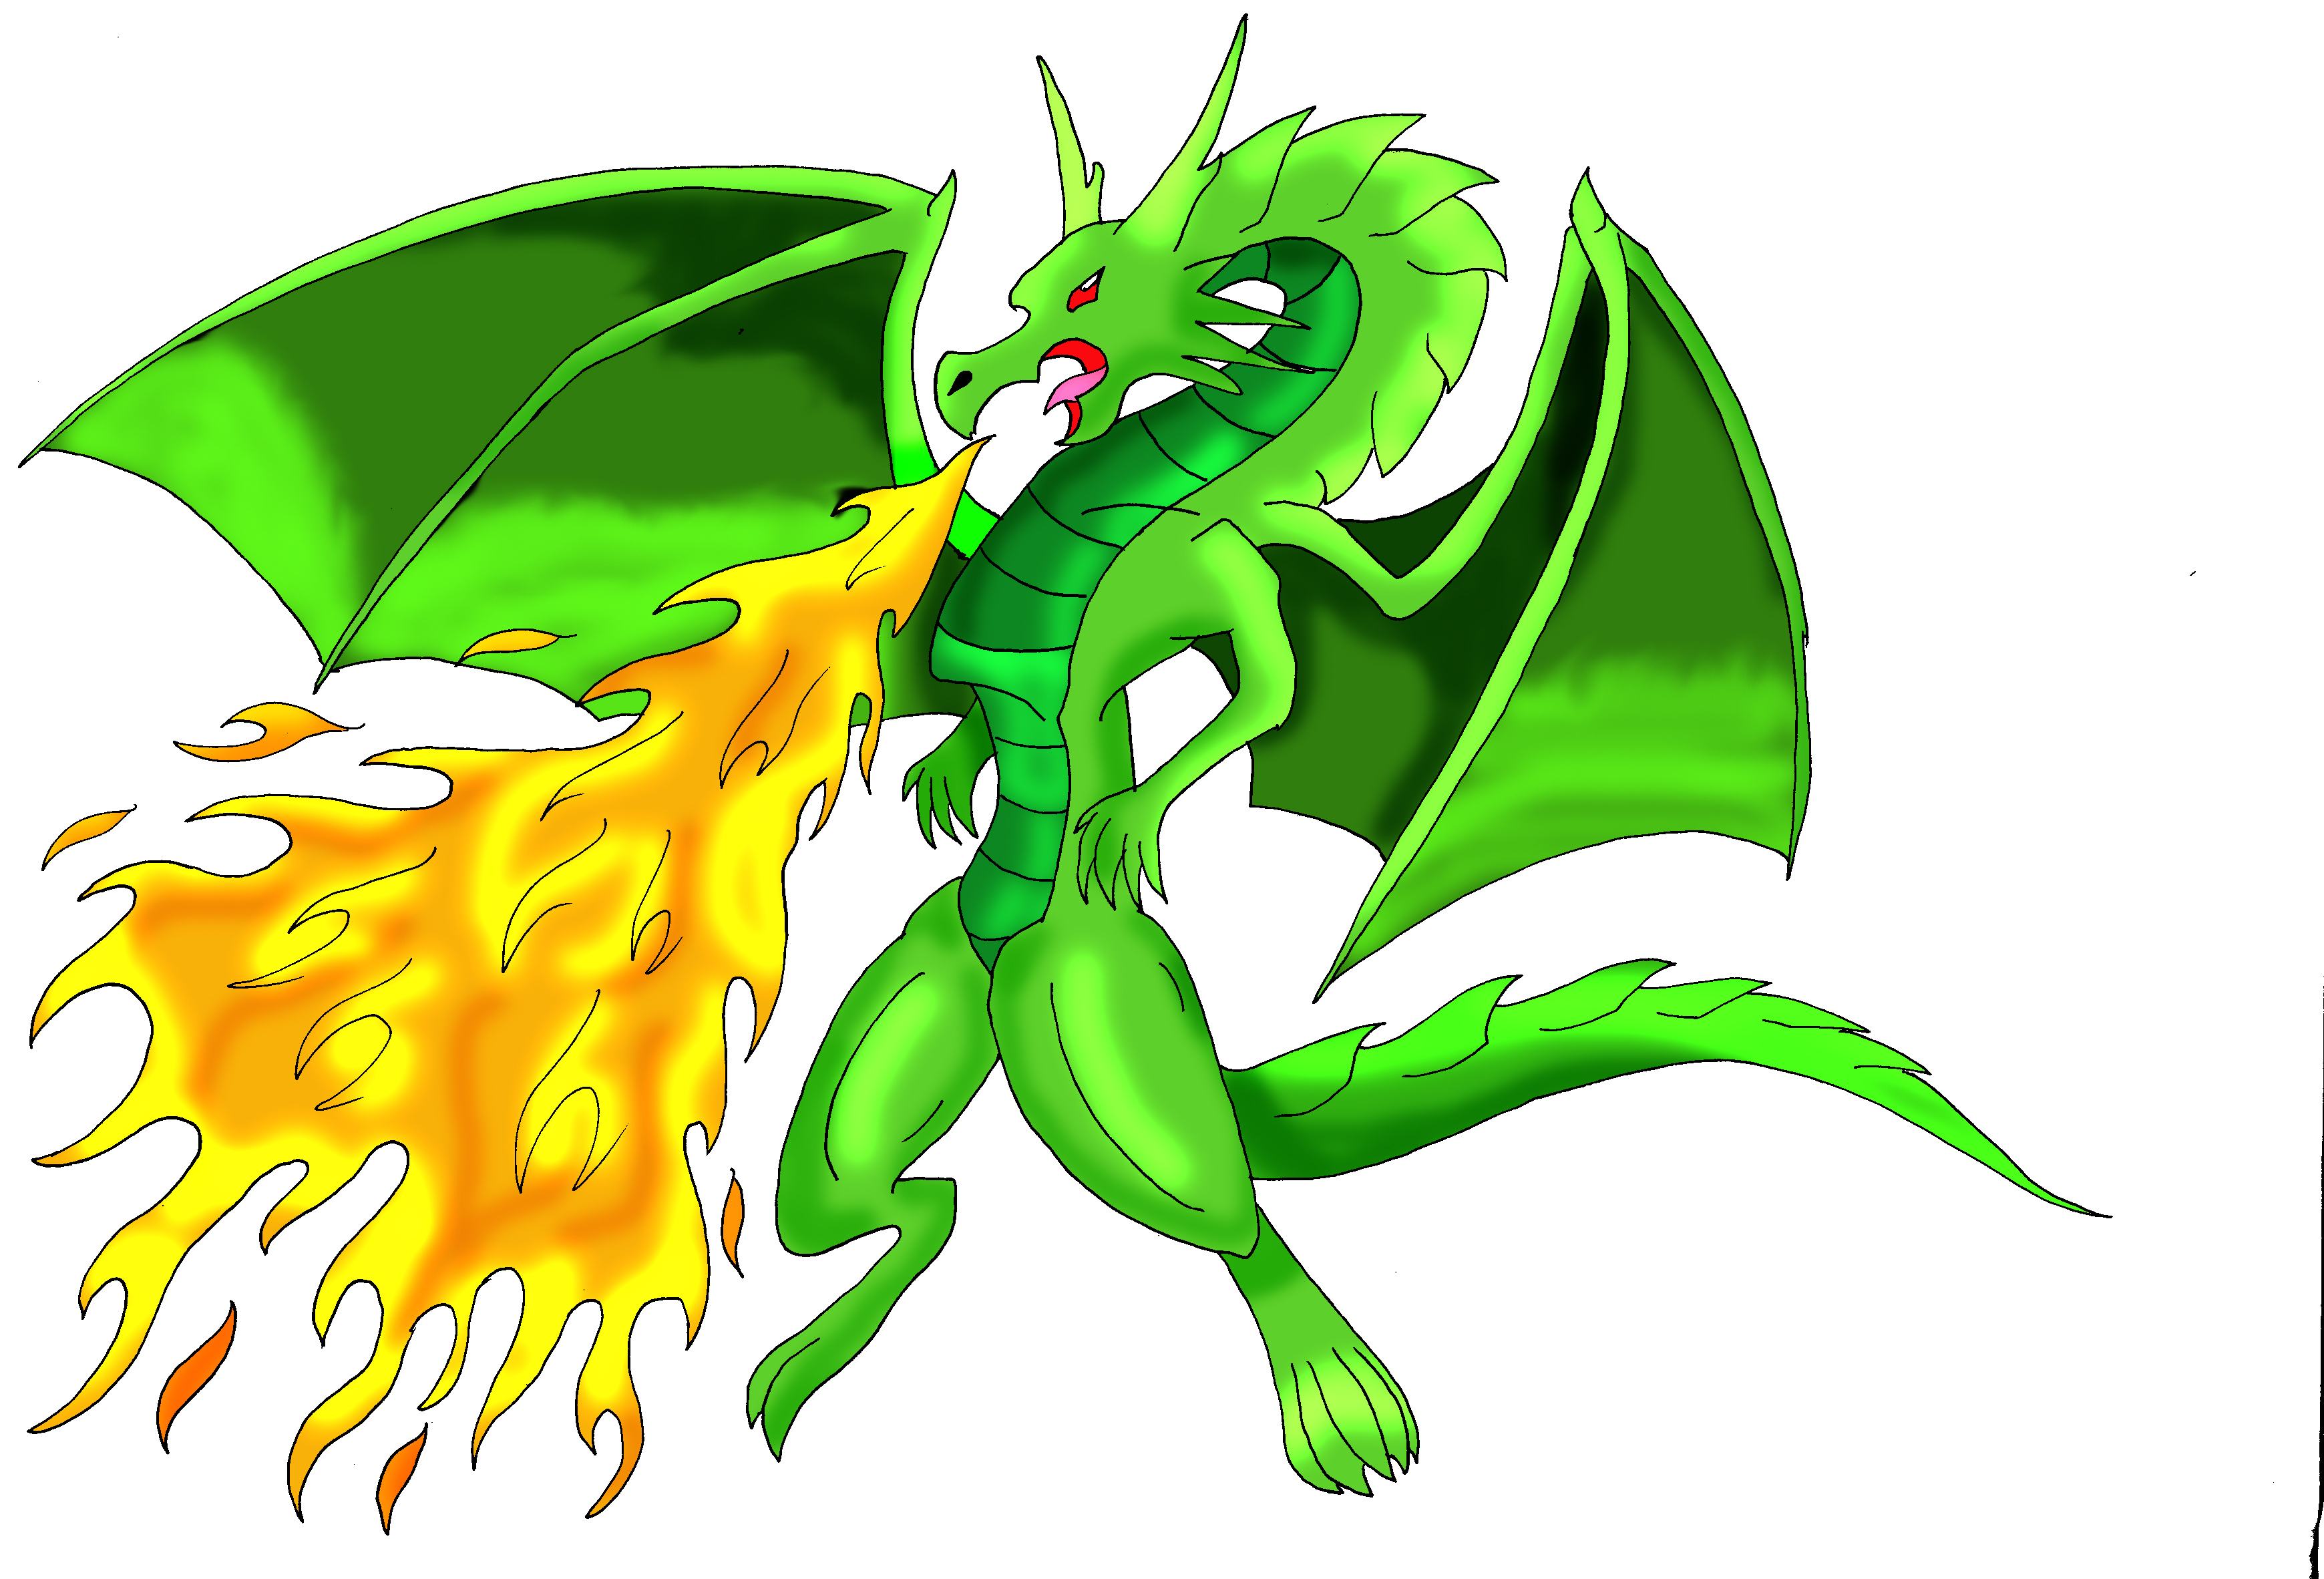 Green Dragon by Chickibo